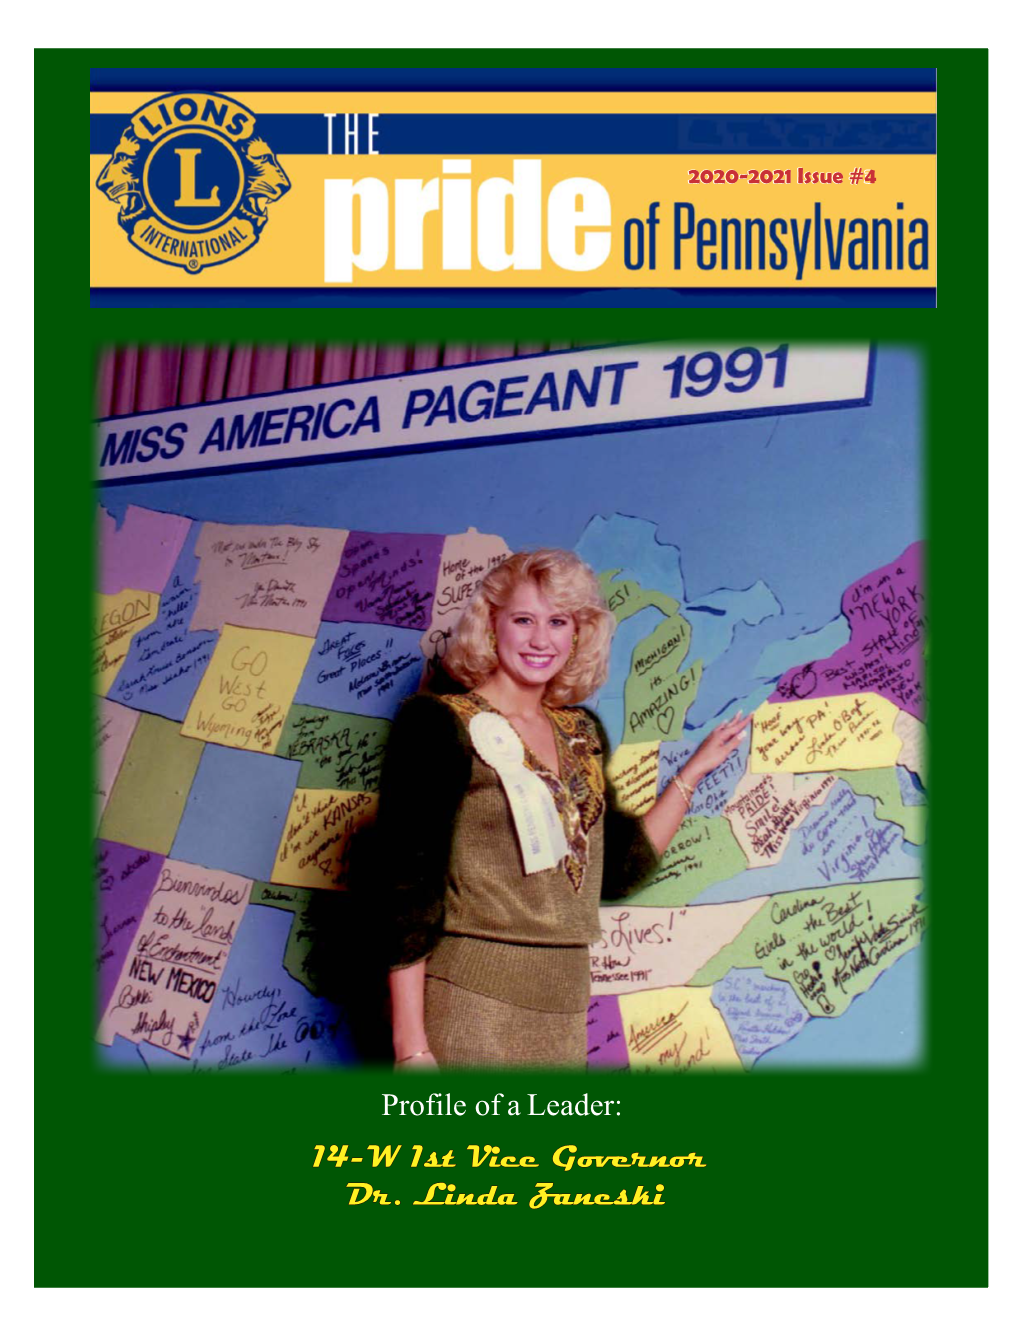 14-W 1St Vice Governor Dr. Linda Zaneski in This Issue